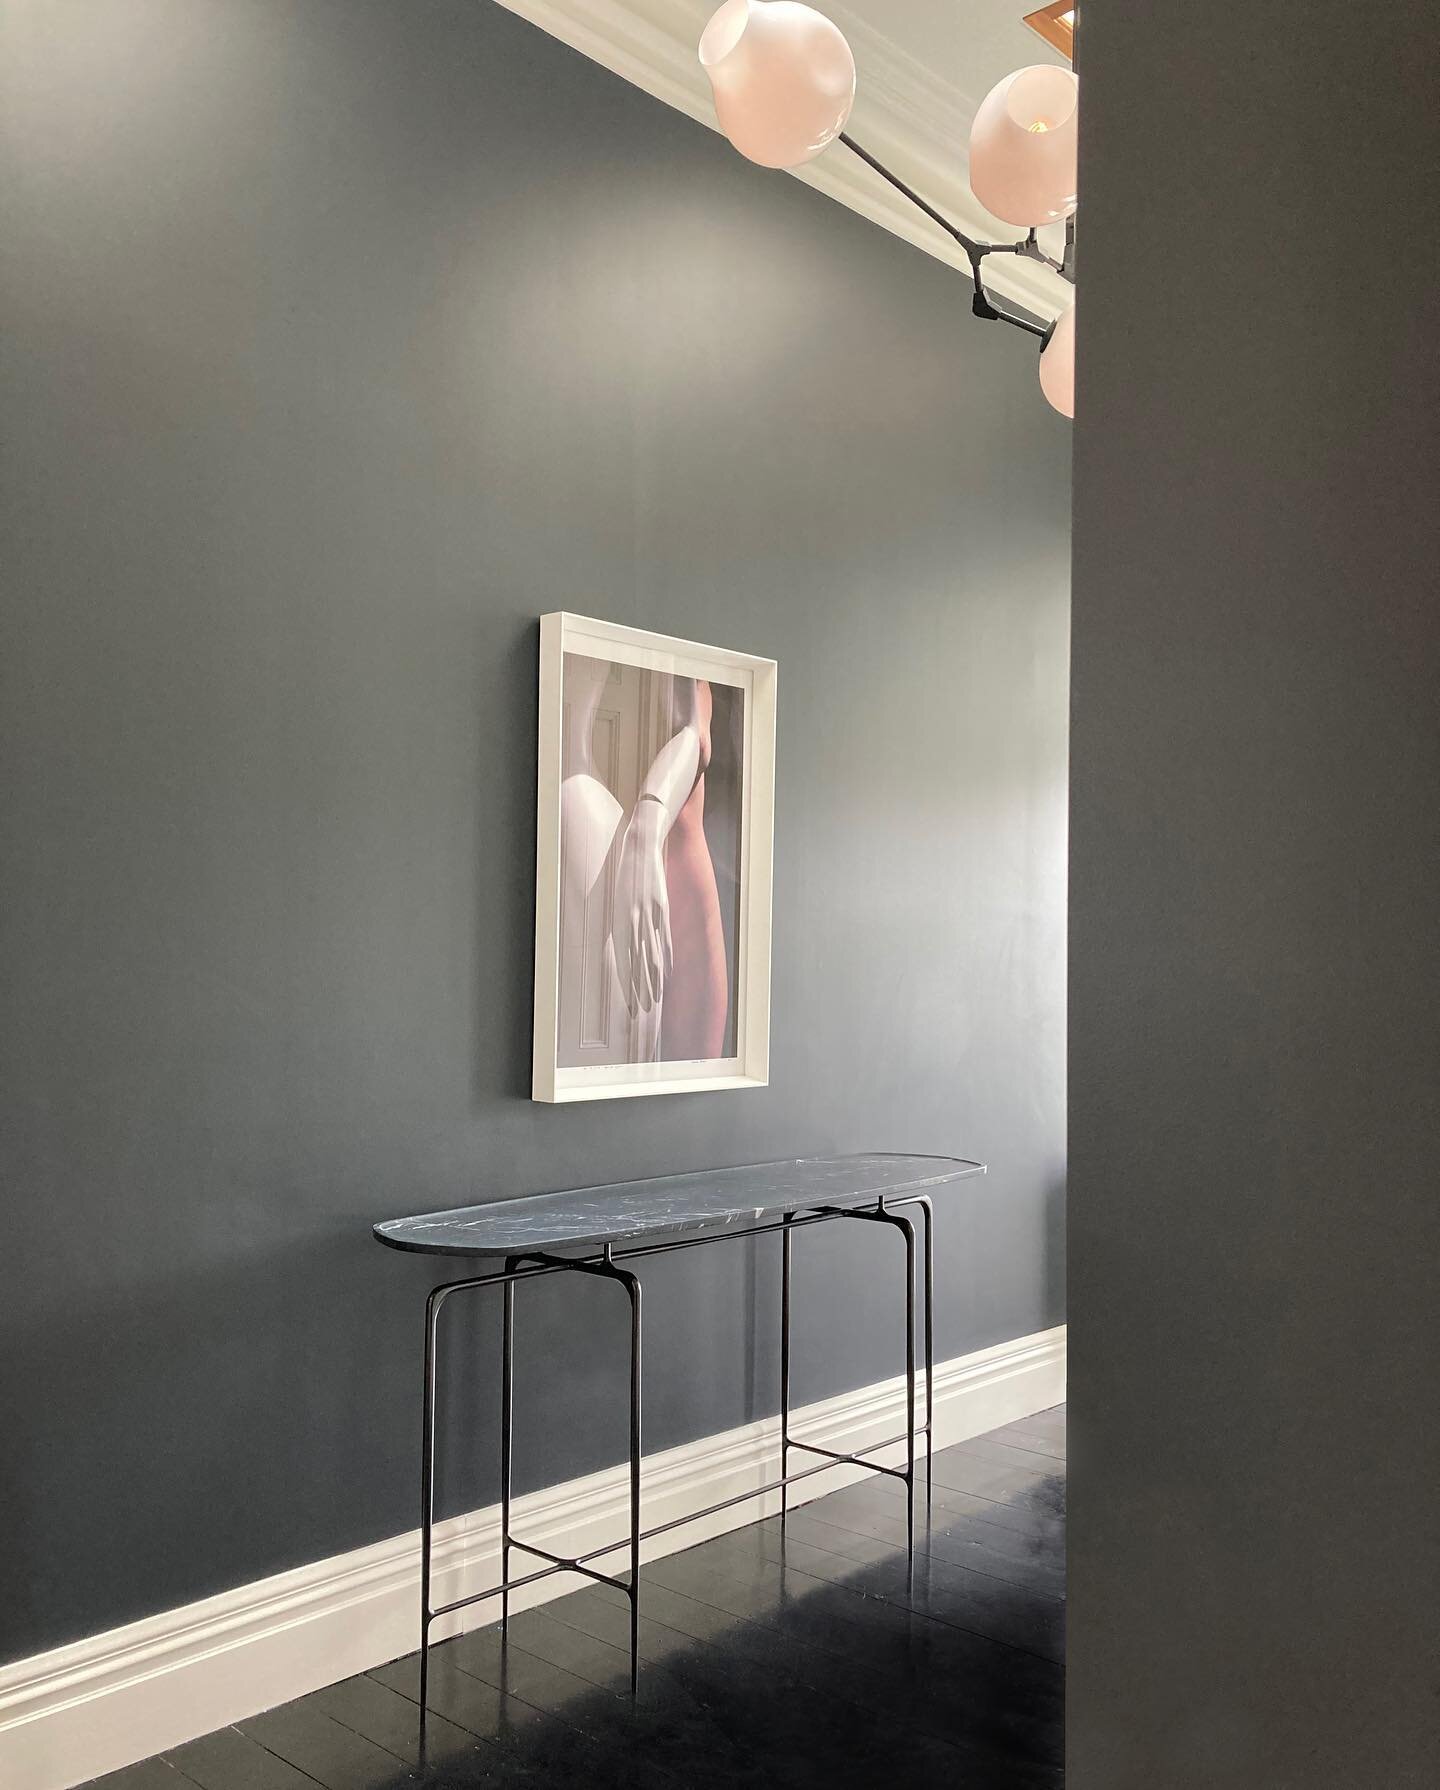 The refined elegance of this custom made console by @castedesign coupled with a simple art piece is all our client&rsquo;s entryway needed. This pairing creates a moment of calm; to pause, to reflect, before heading out into the city for a hustle and